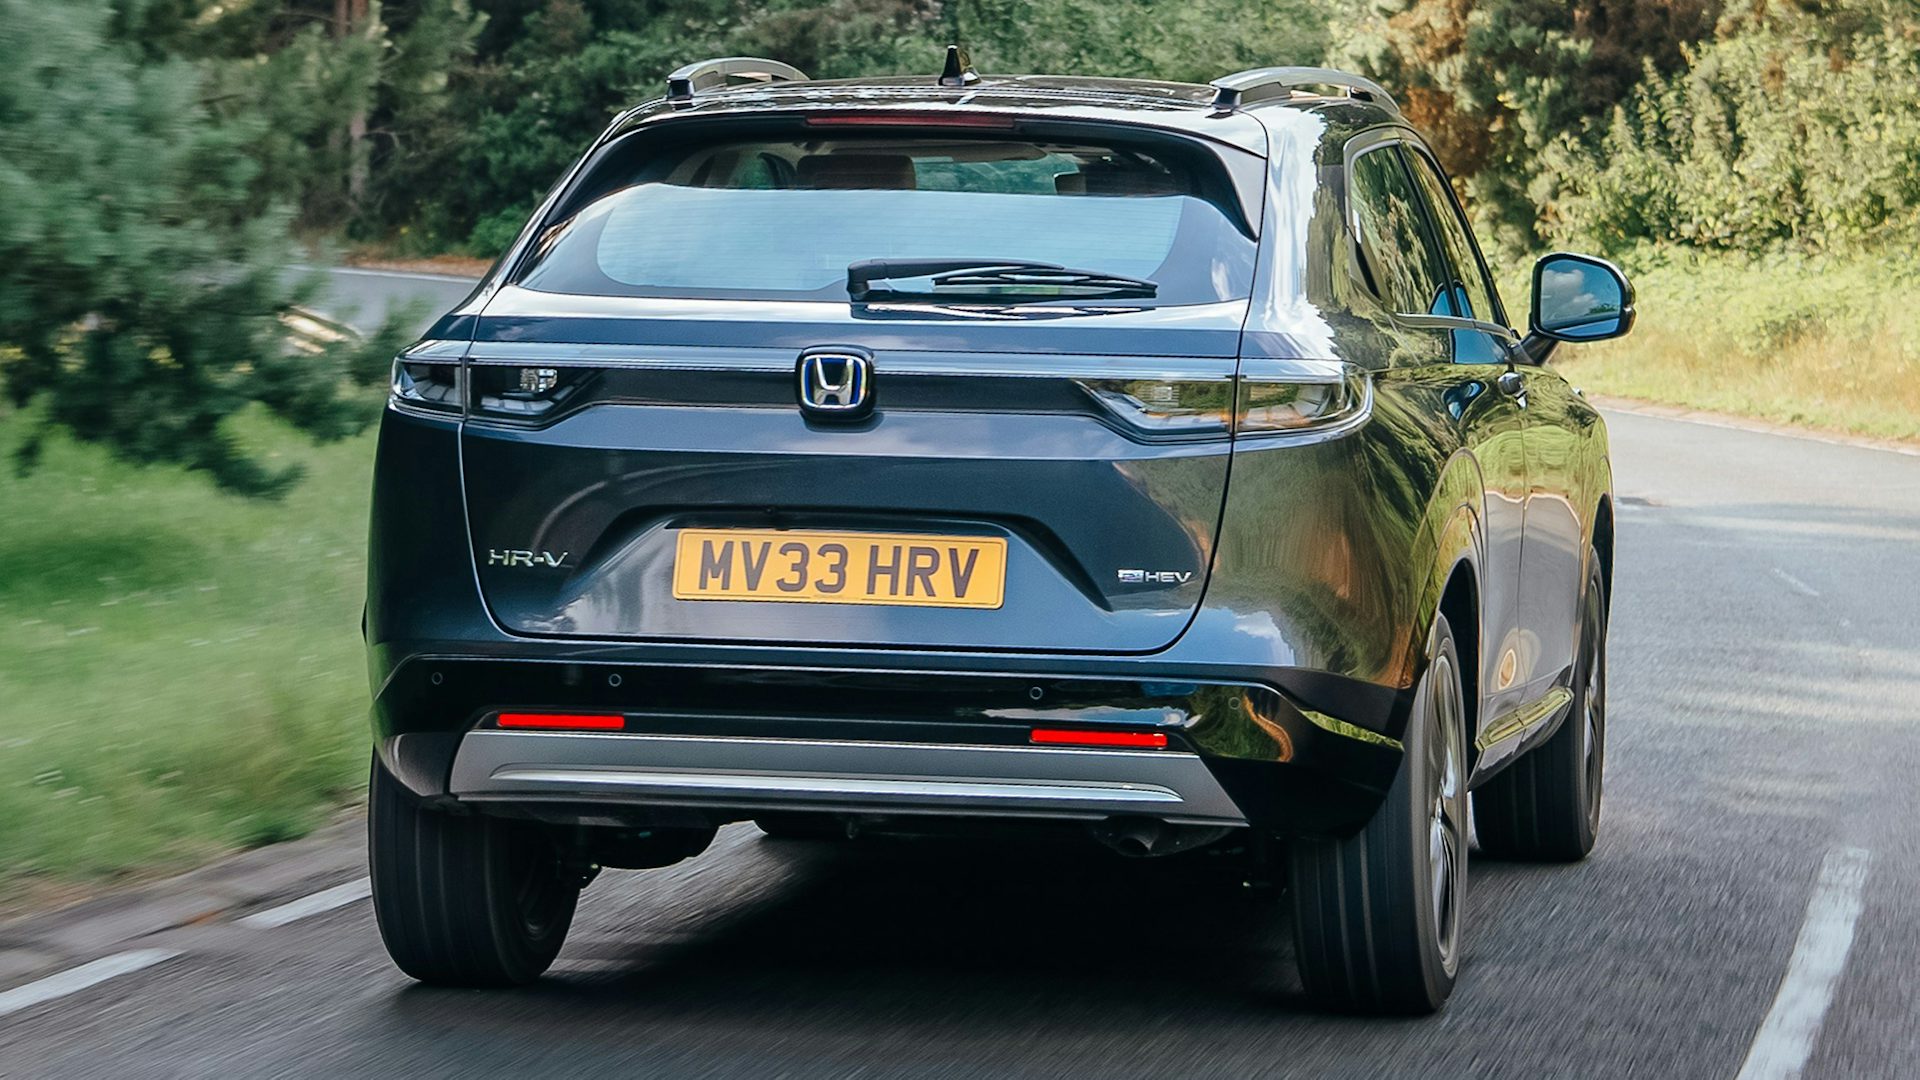 New 2022 Honda HR-V hybrid on sale now – costs from £26,960 | carwow